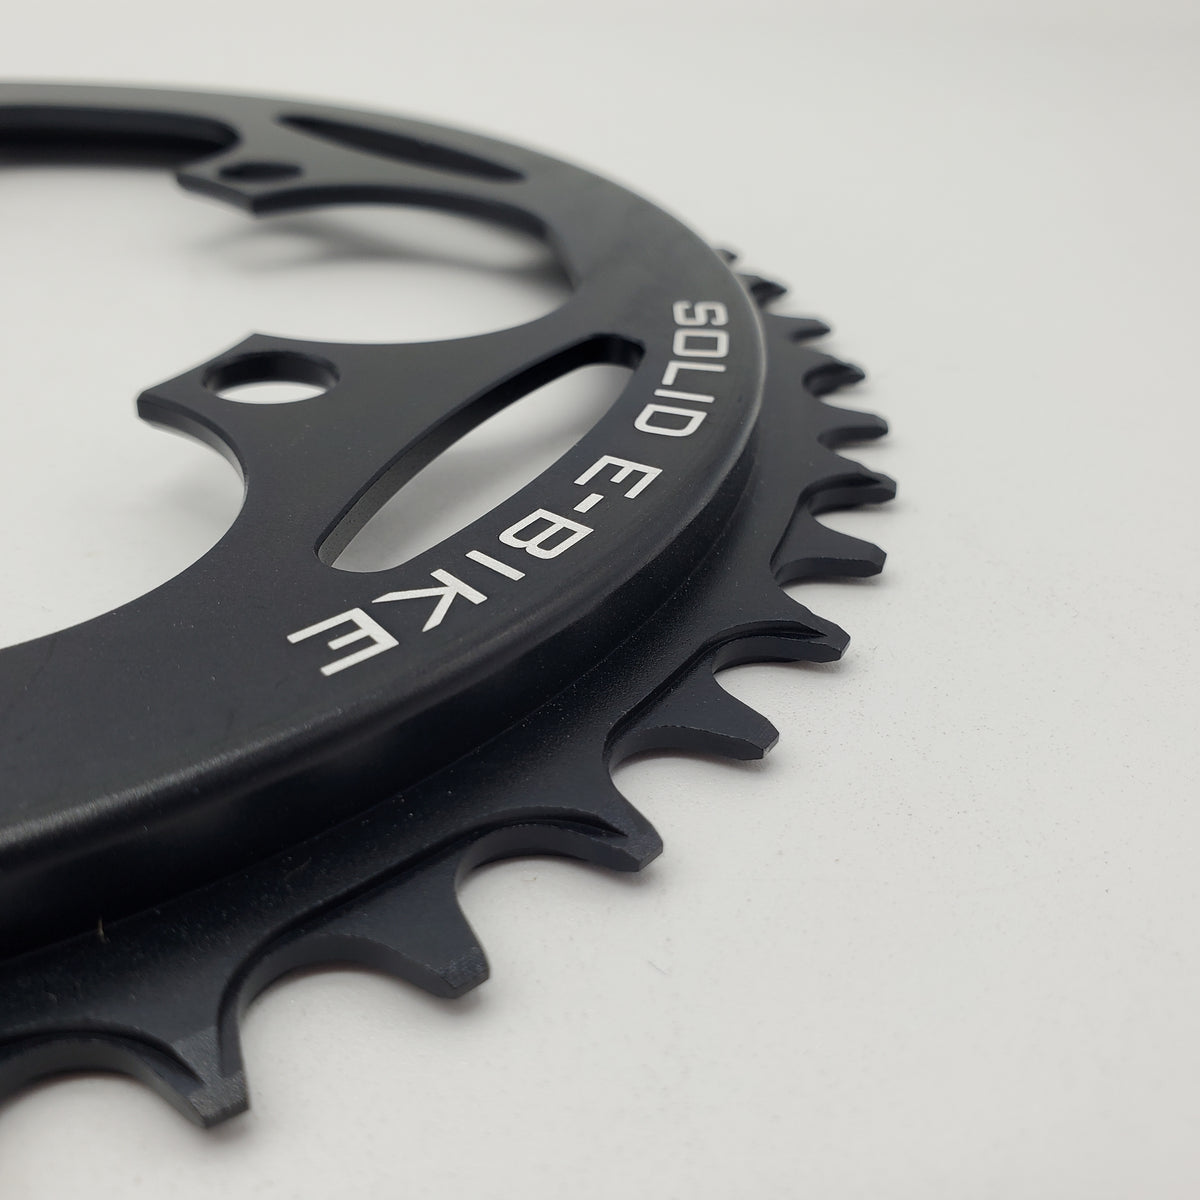 50T Chainring for TSDZ2 - Narrow Wide - 10mm Offset - 110 BCD (Solid E-bike)